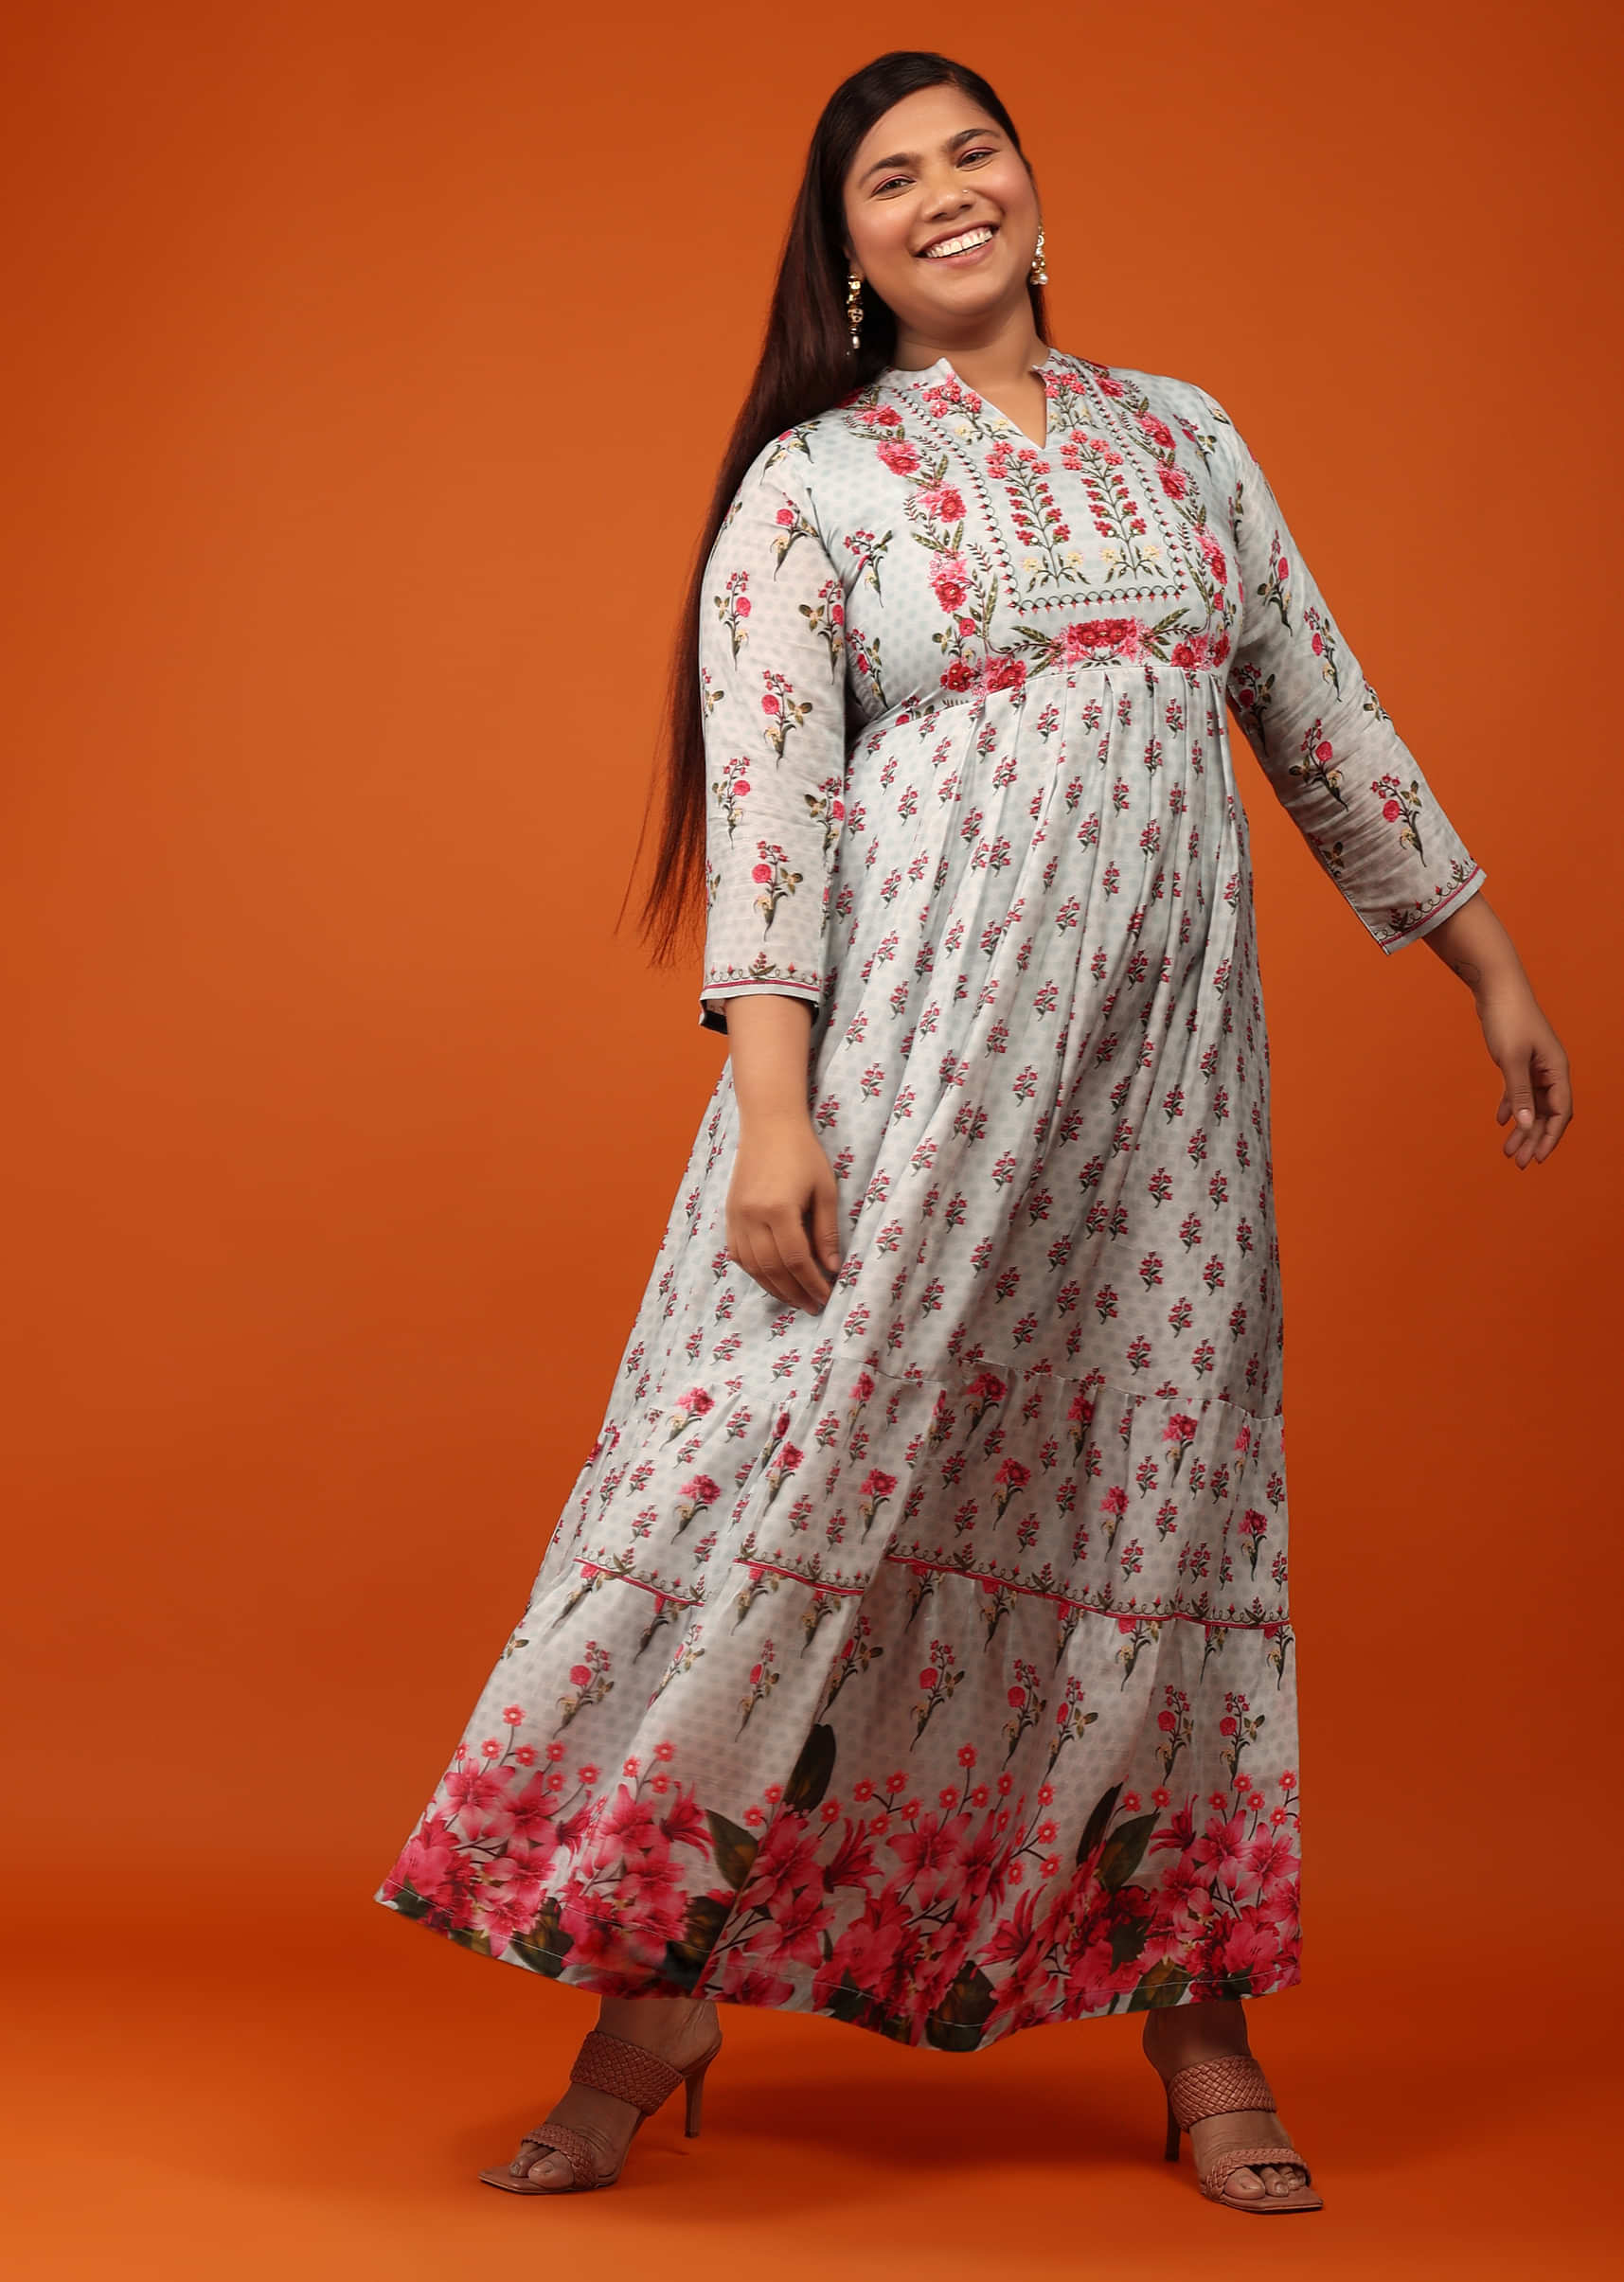 Shop for Party Wear Kurtis Online | Latest Party Wear Style of Kurtis